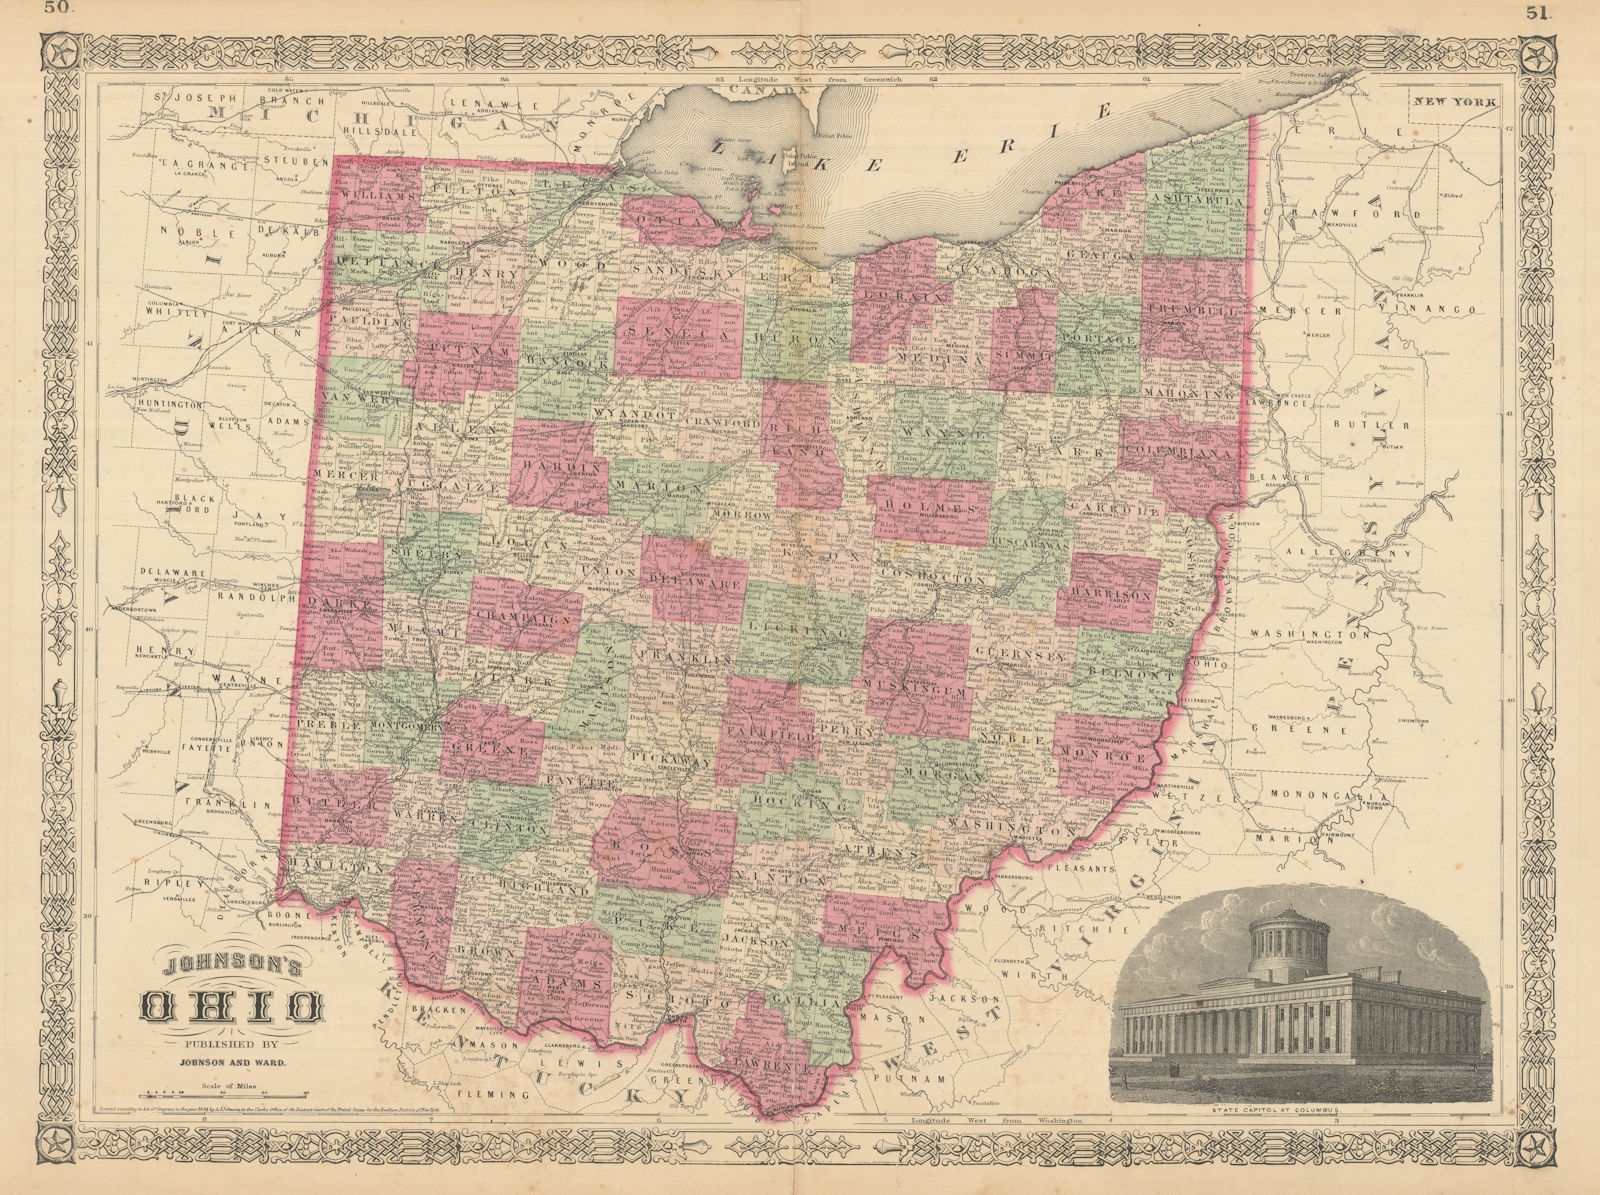 Associate Product Johnson's Ohio. US state map showing counties 1866 old antique plan chart